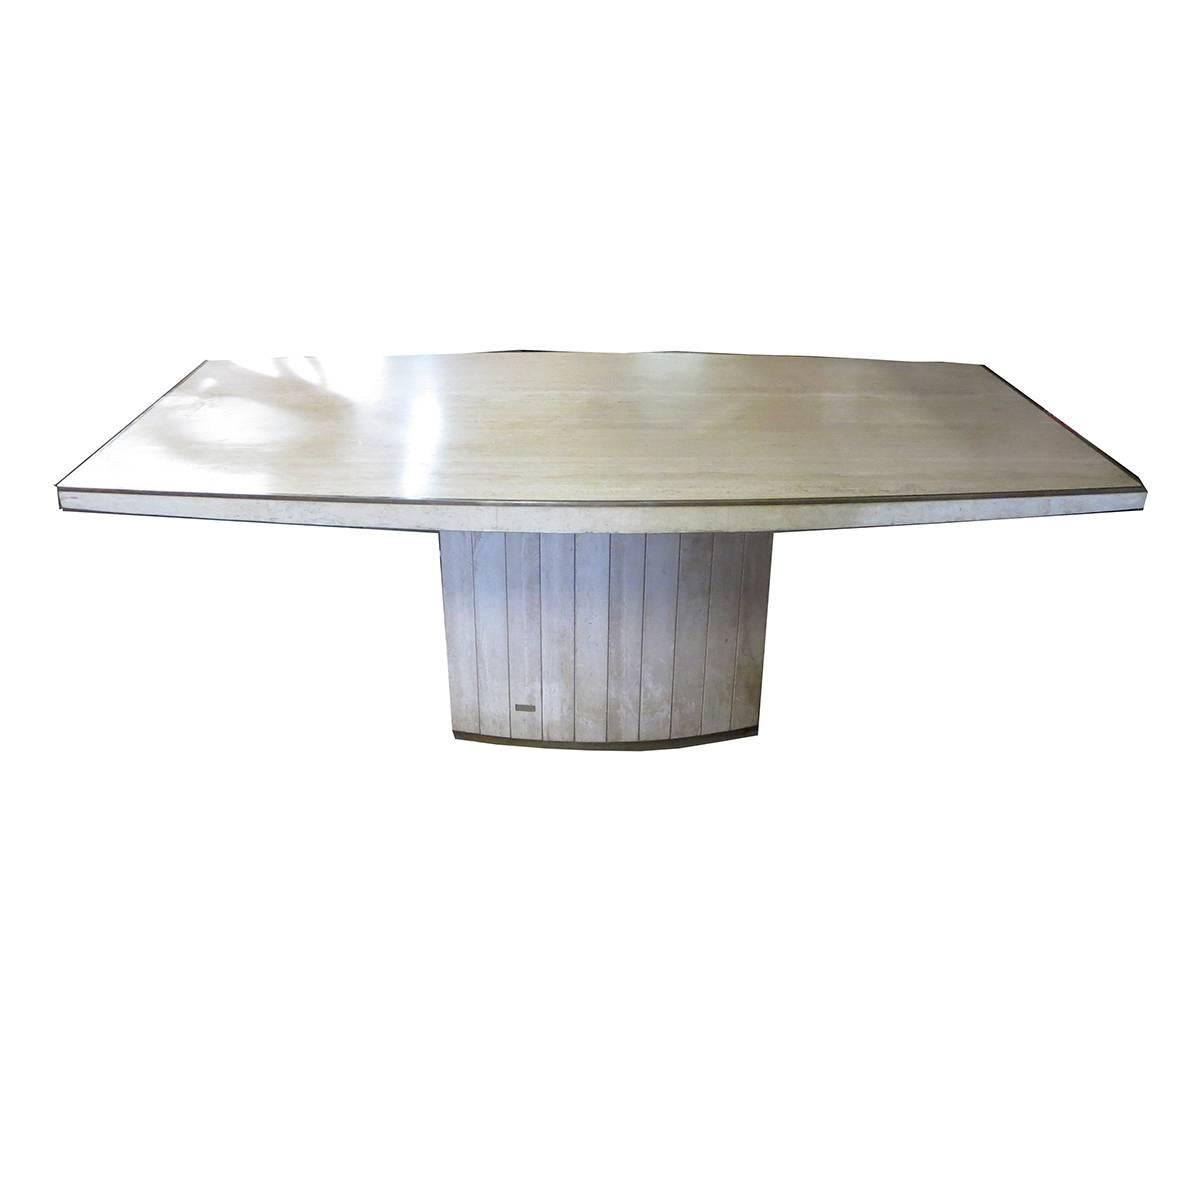 This beautiful and classic design was executed in travertine marble with brass accents. The table retains original Jean Charles Company brass label. The scale is well suited for any interior home or office space.